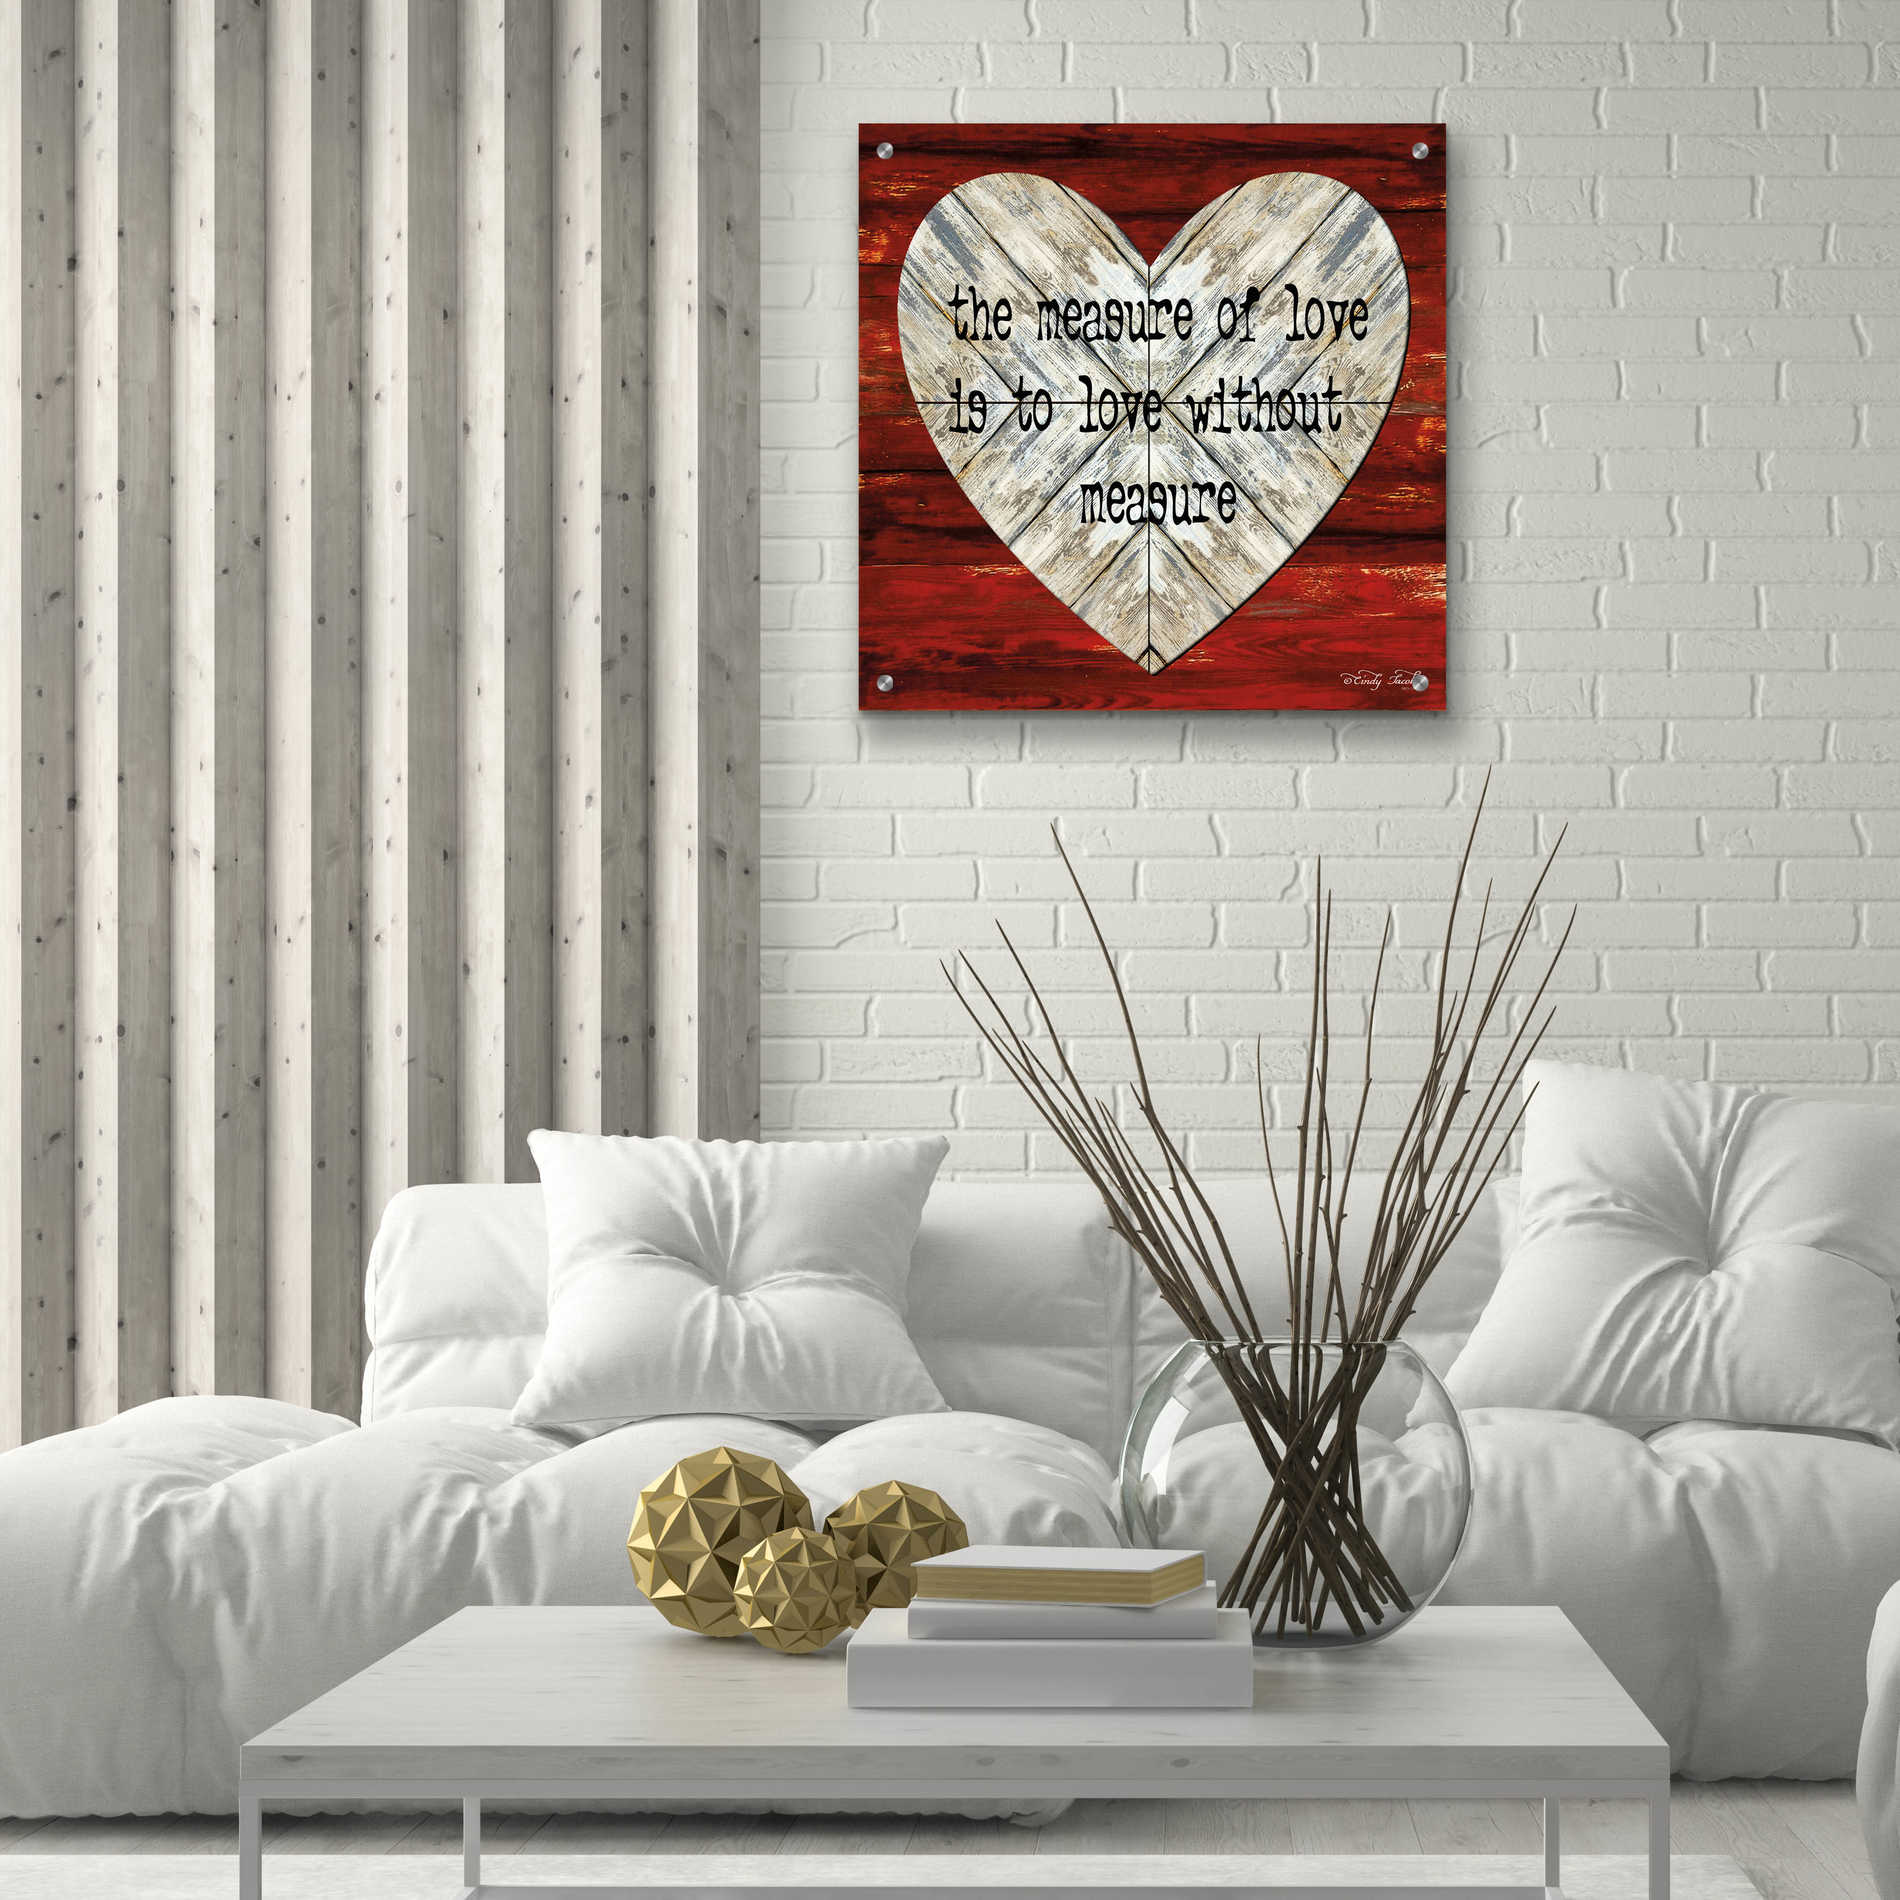 Epic Art 'The Measure of Love' by Cindy Jacobs, Acrylic Glass Wall Art,24x24